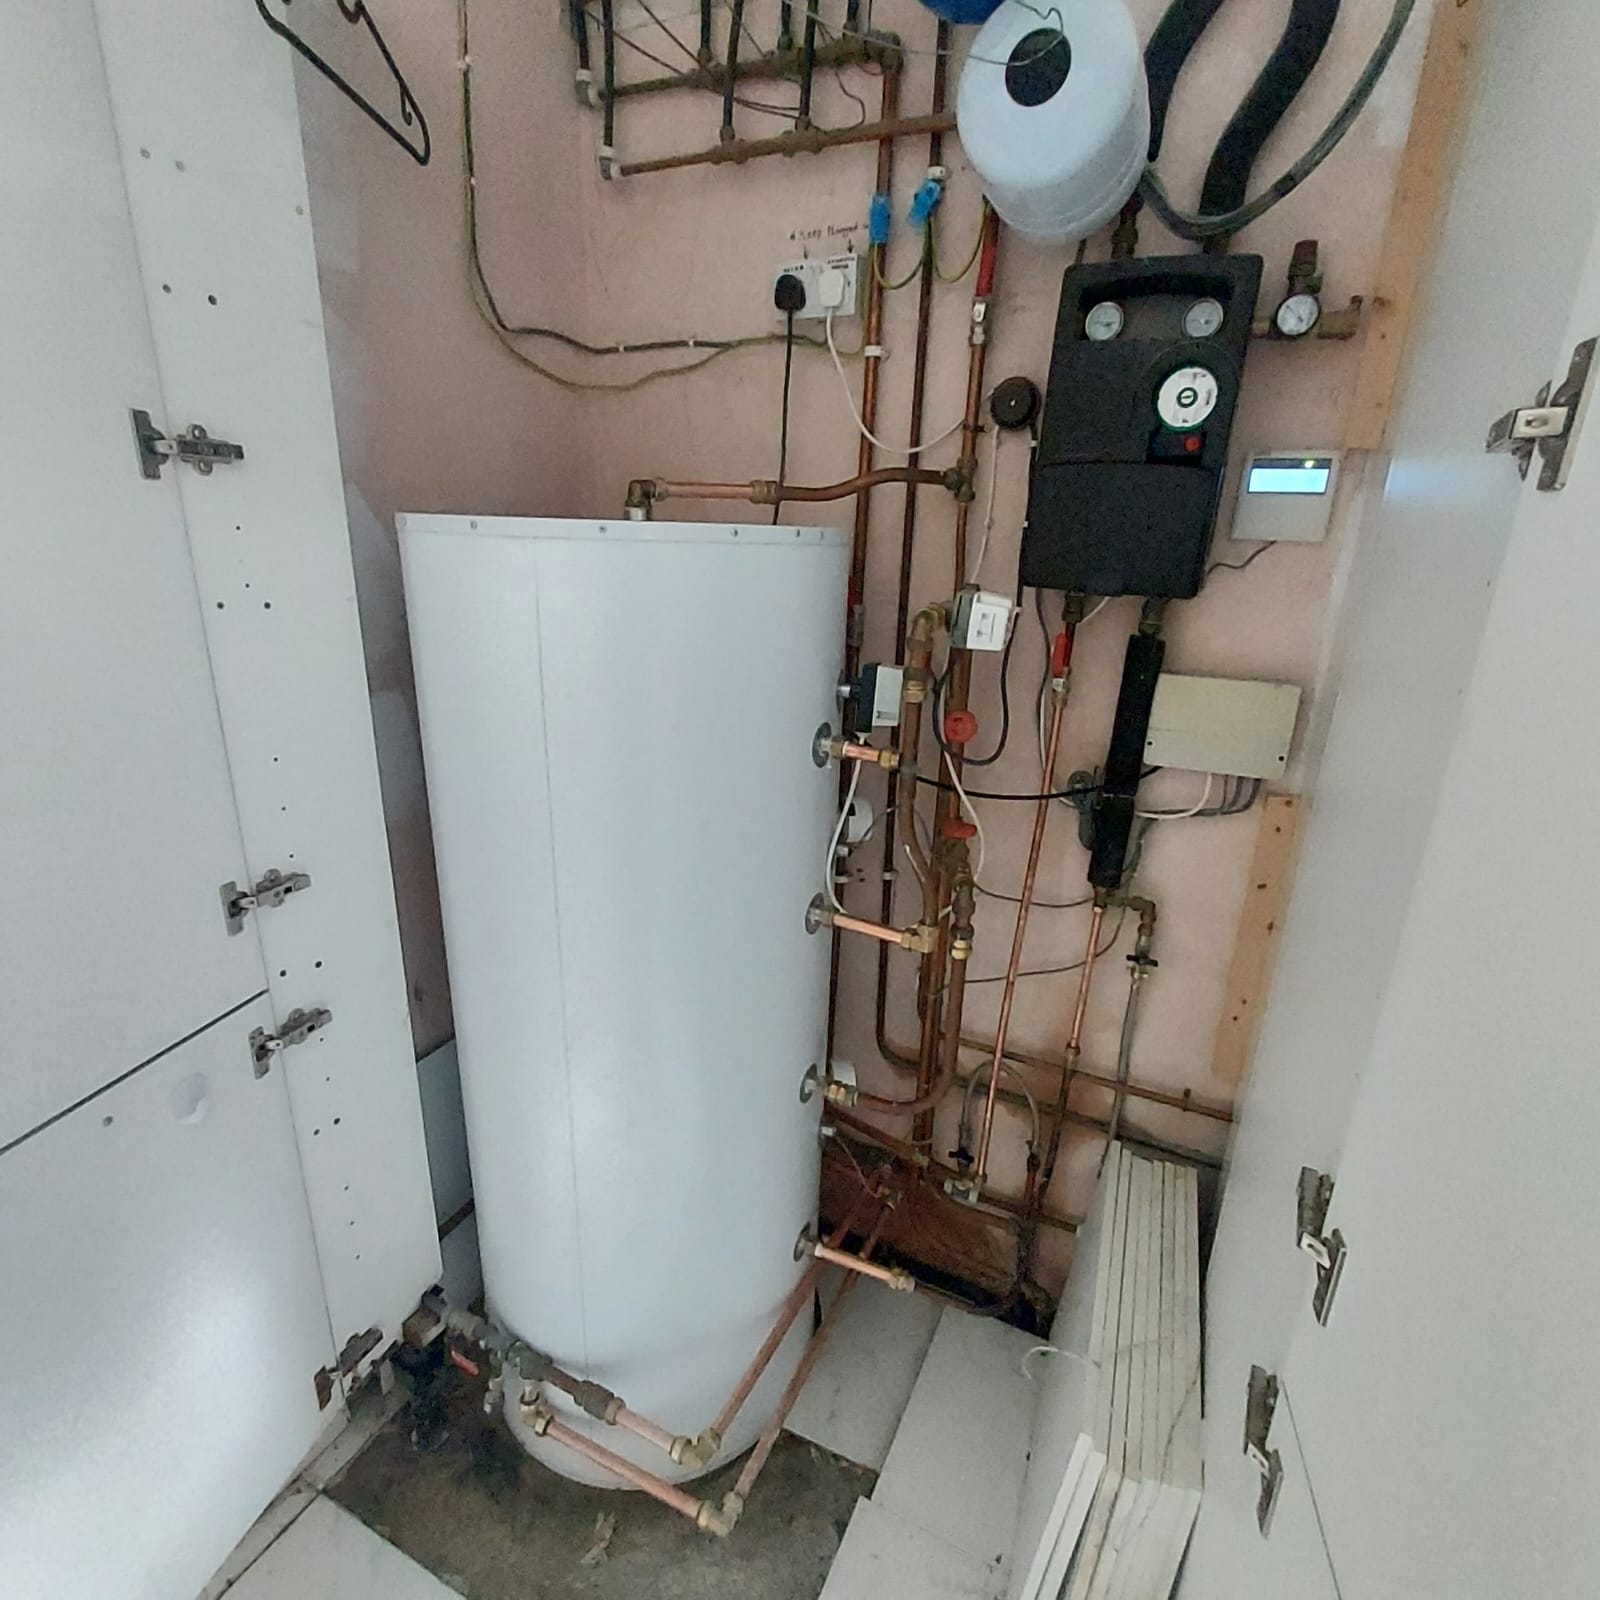 Professional Hot Water Cyclinder Replacement - New Heating System